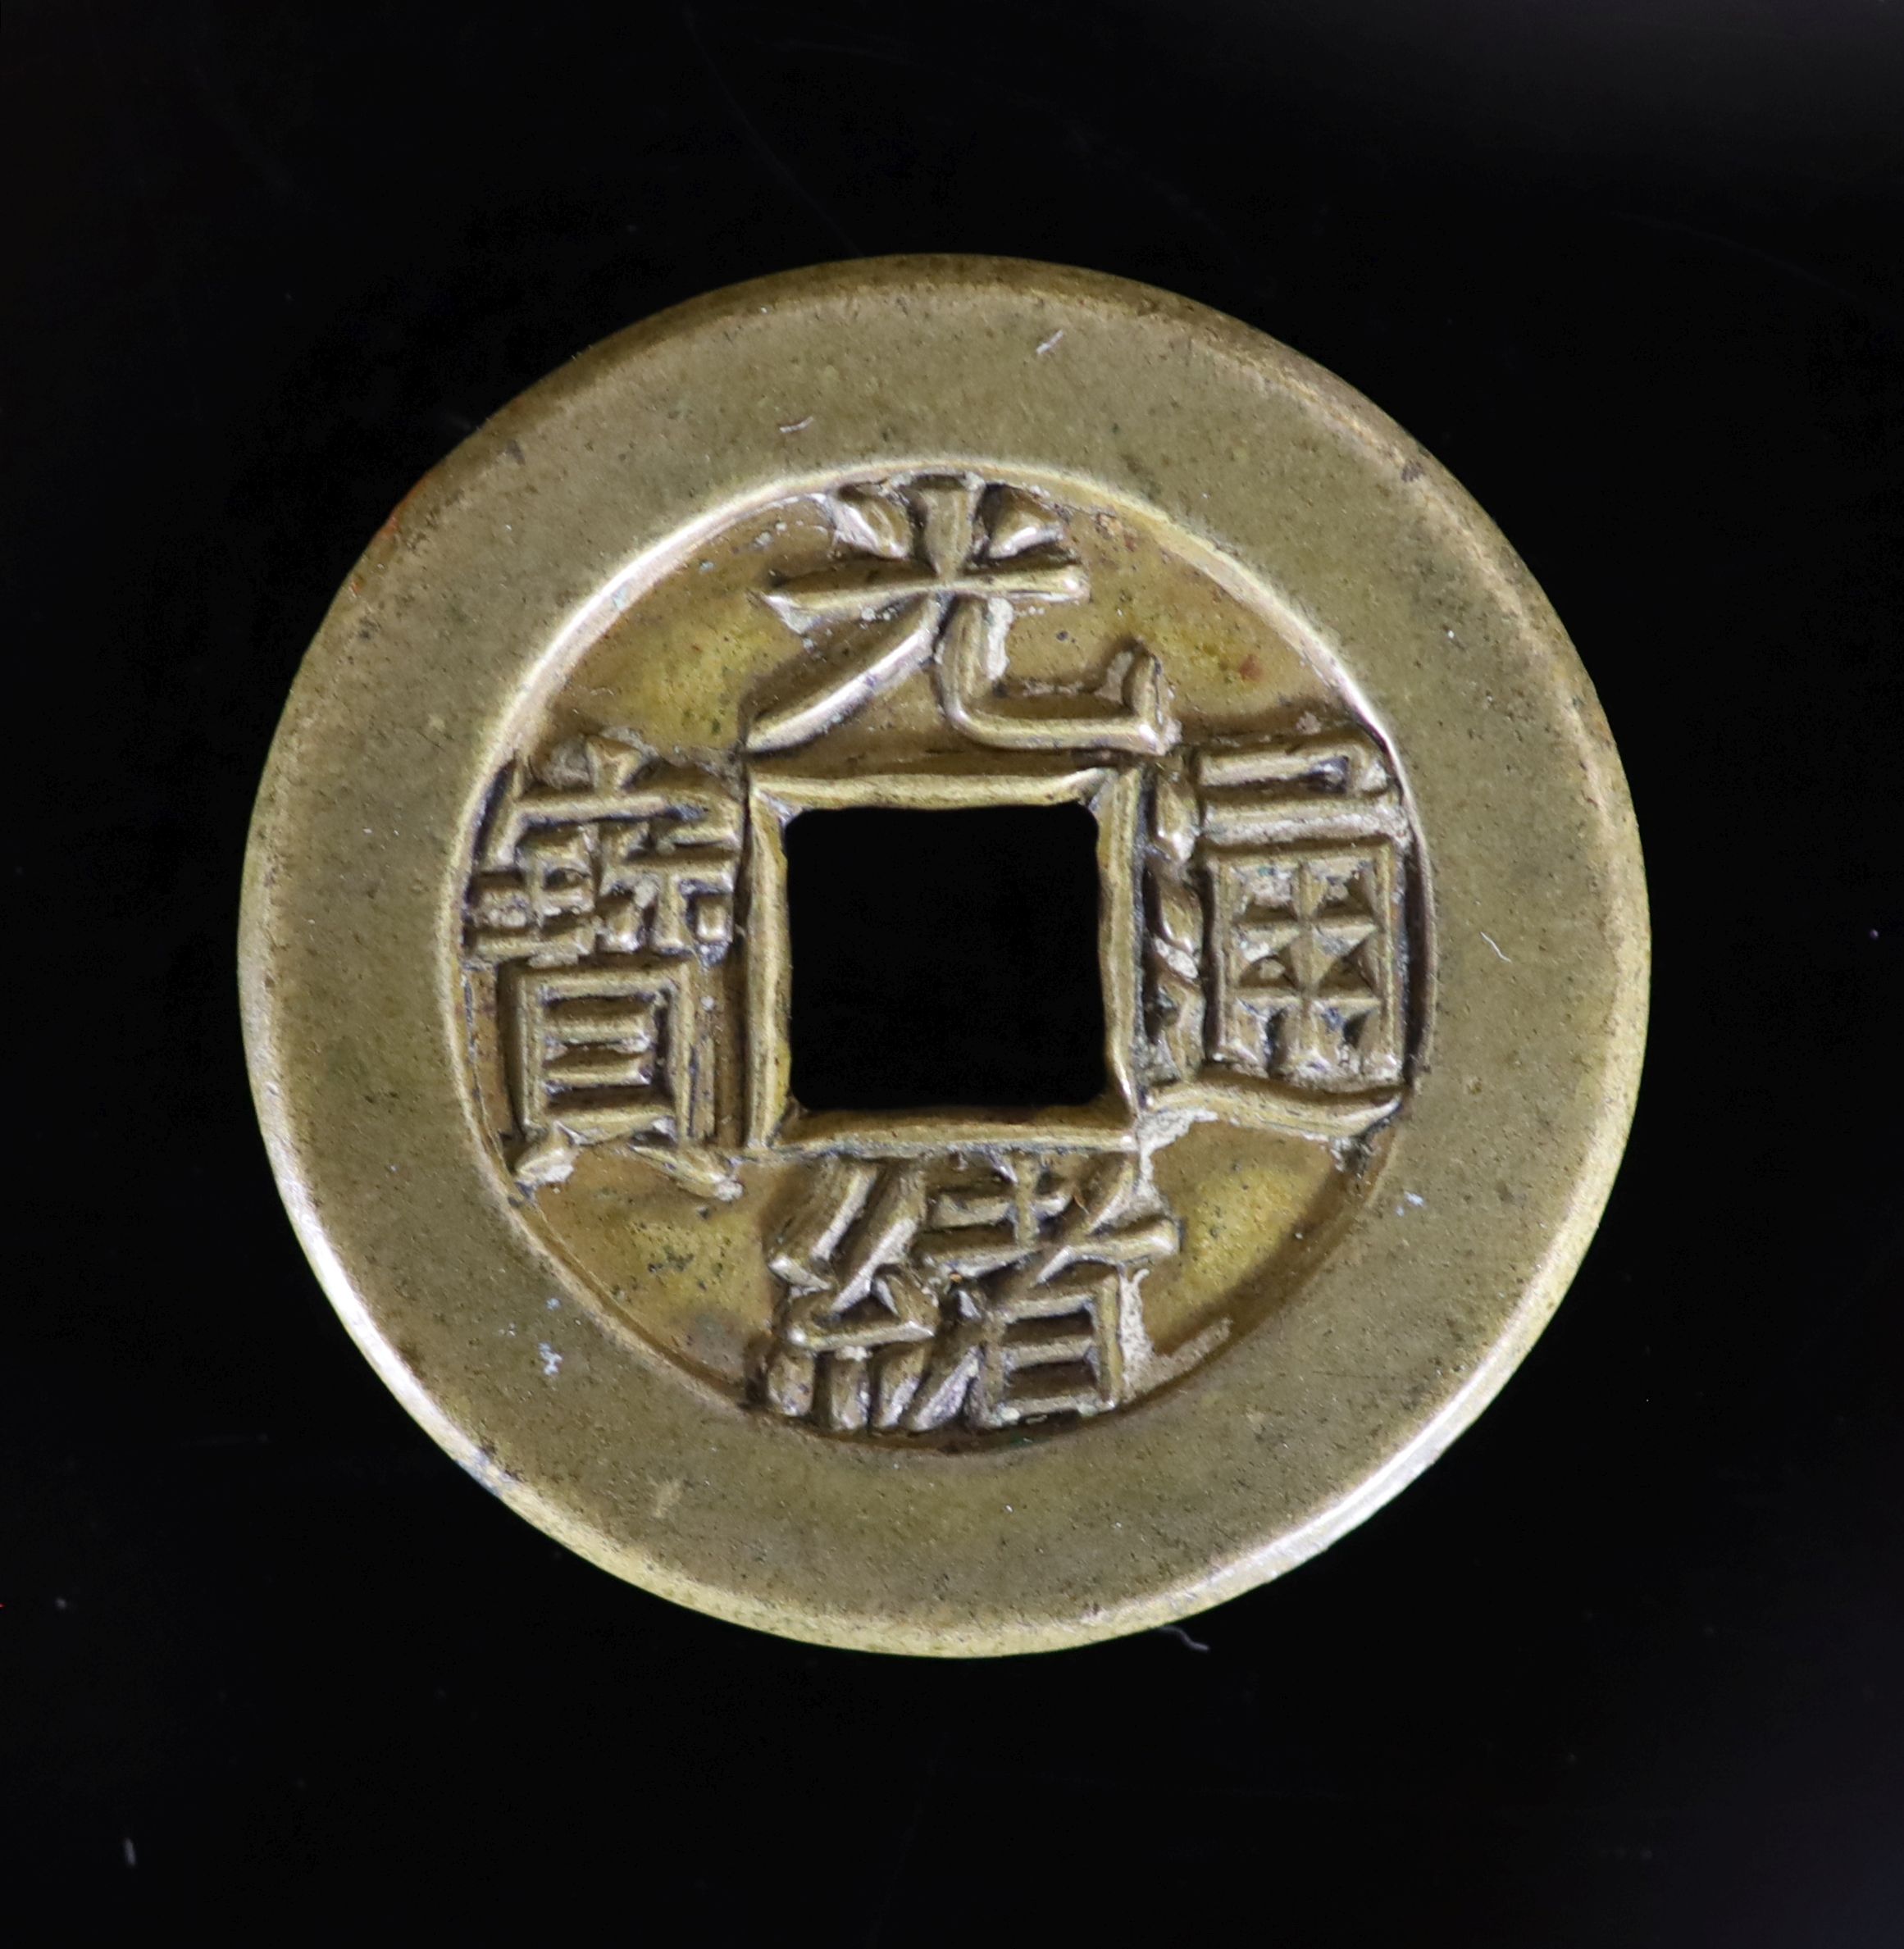 China Empire, coins - a rare Guangxu tongbao 1 cash mother coin for the Board of Revenue, relating to Hartill CCC 22.1276, 25mm, 5.6g